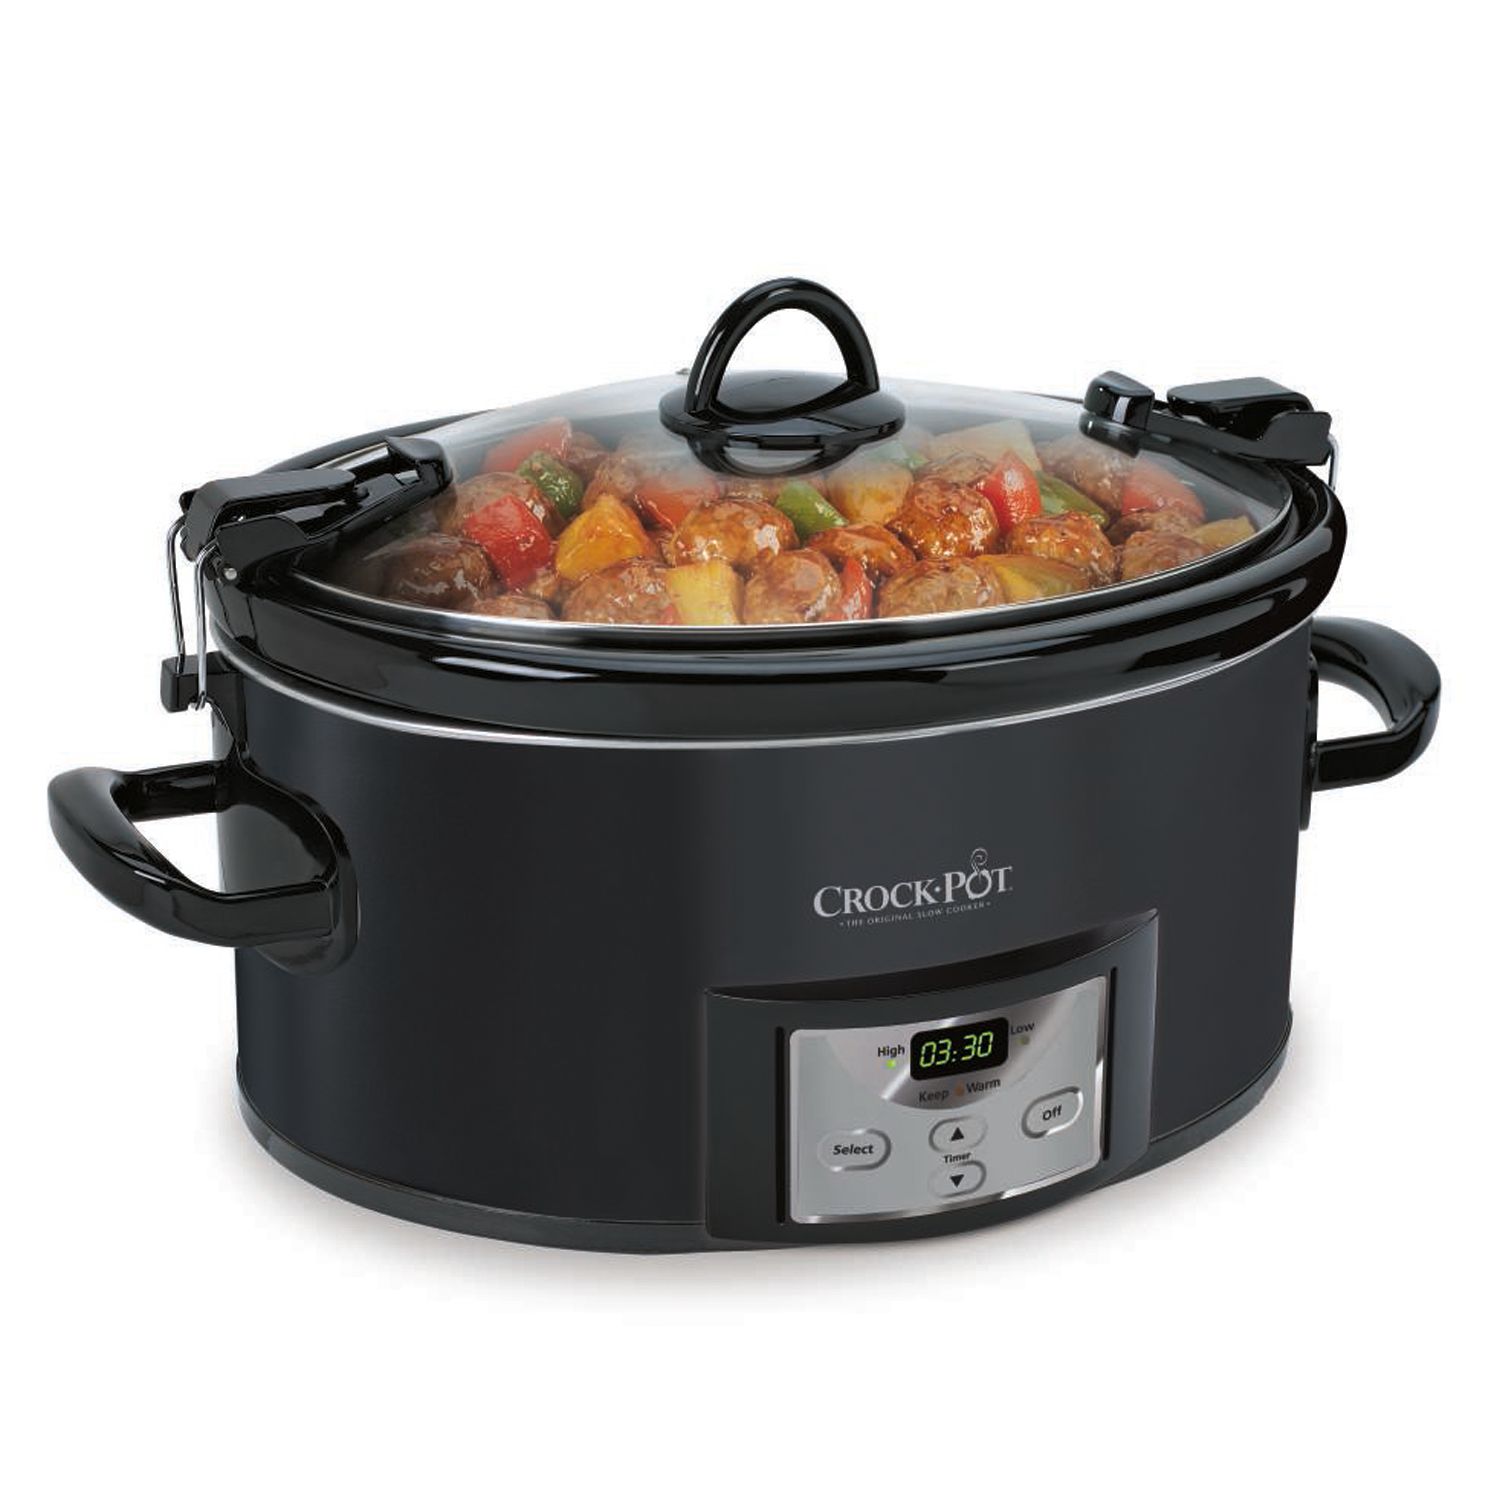 Maxi-Matic Elite Gourmet 1.5 Qt. Mini Slow Cooker in Stainless